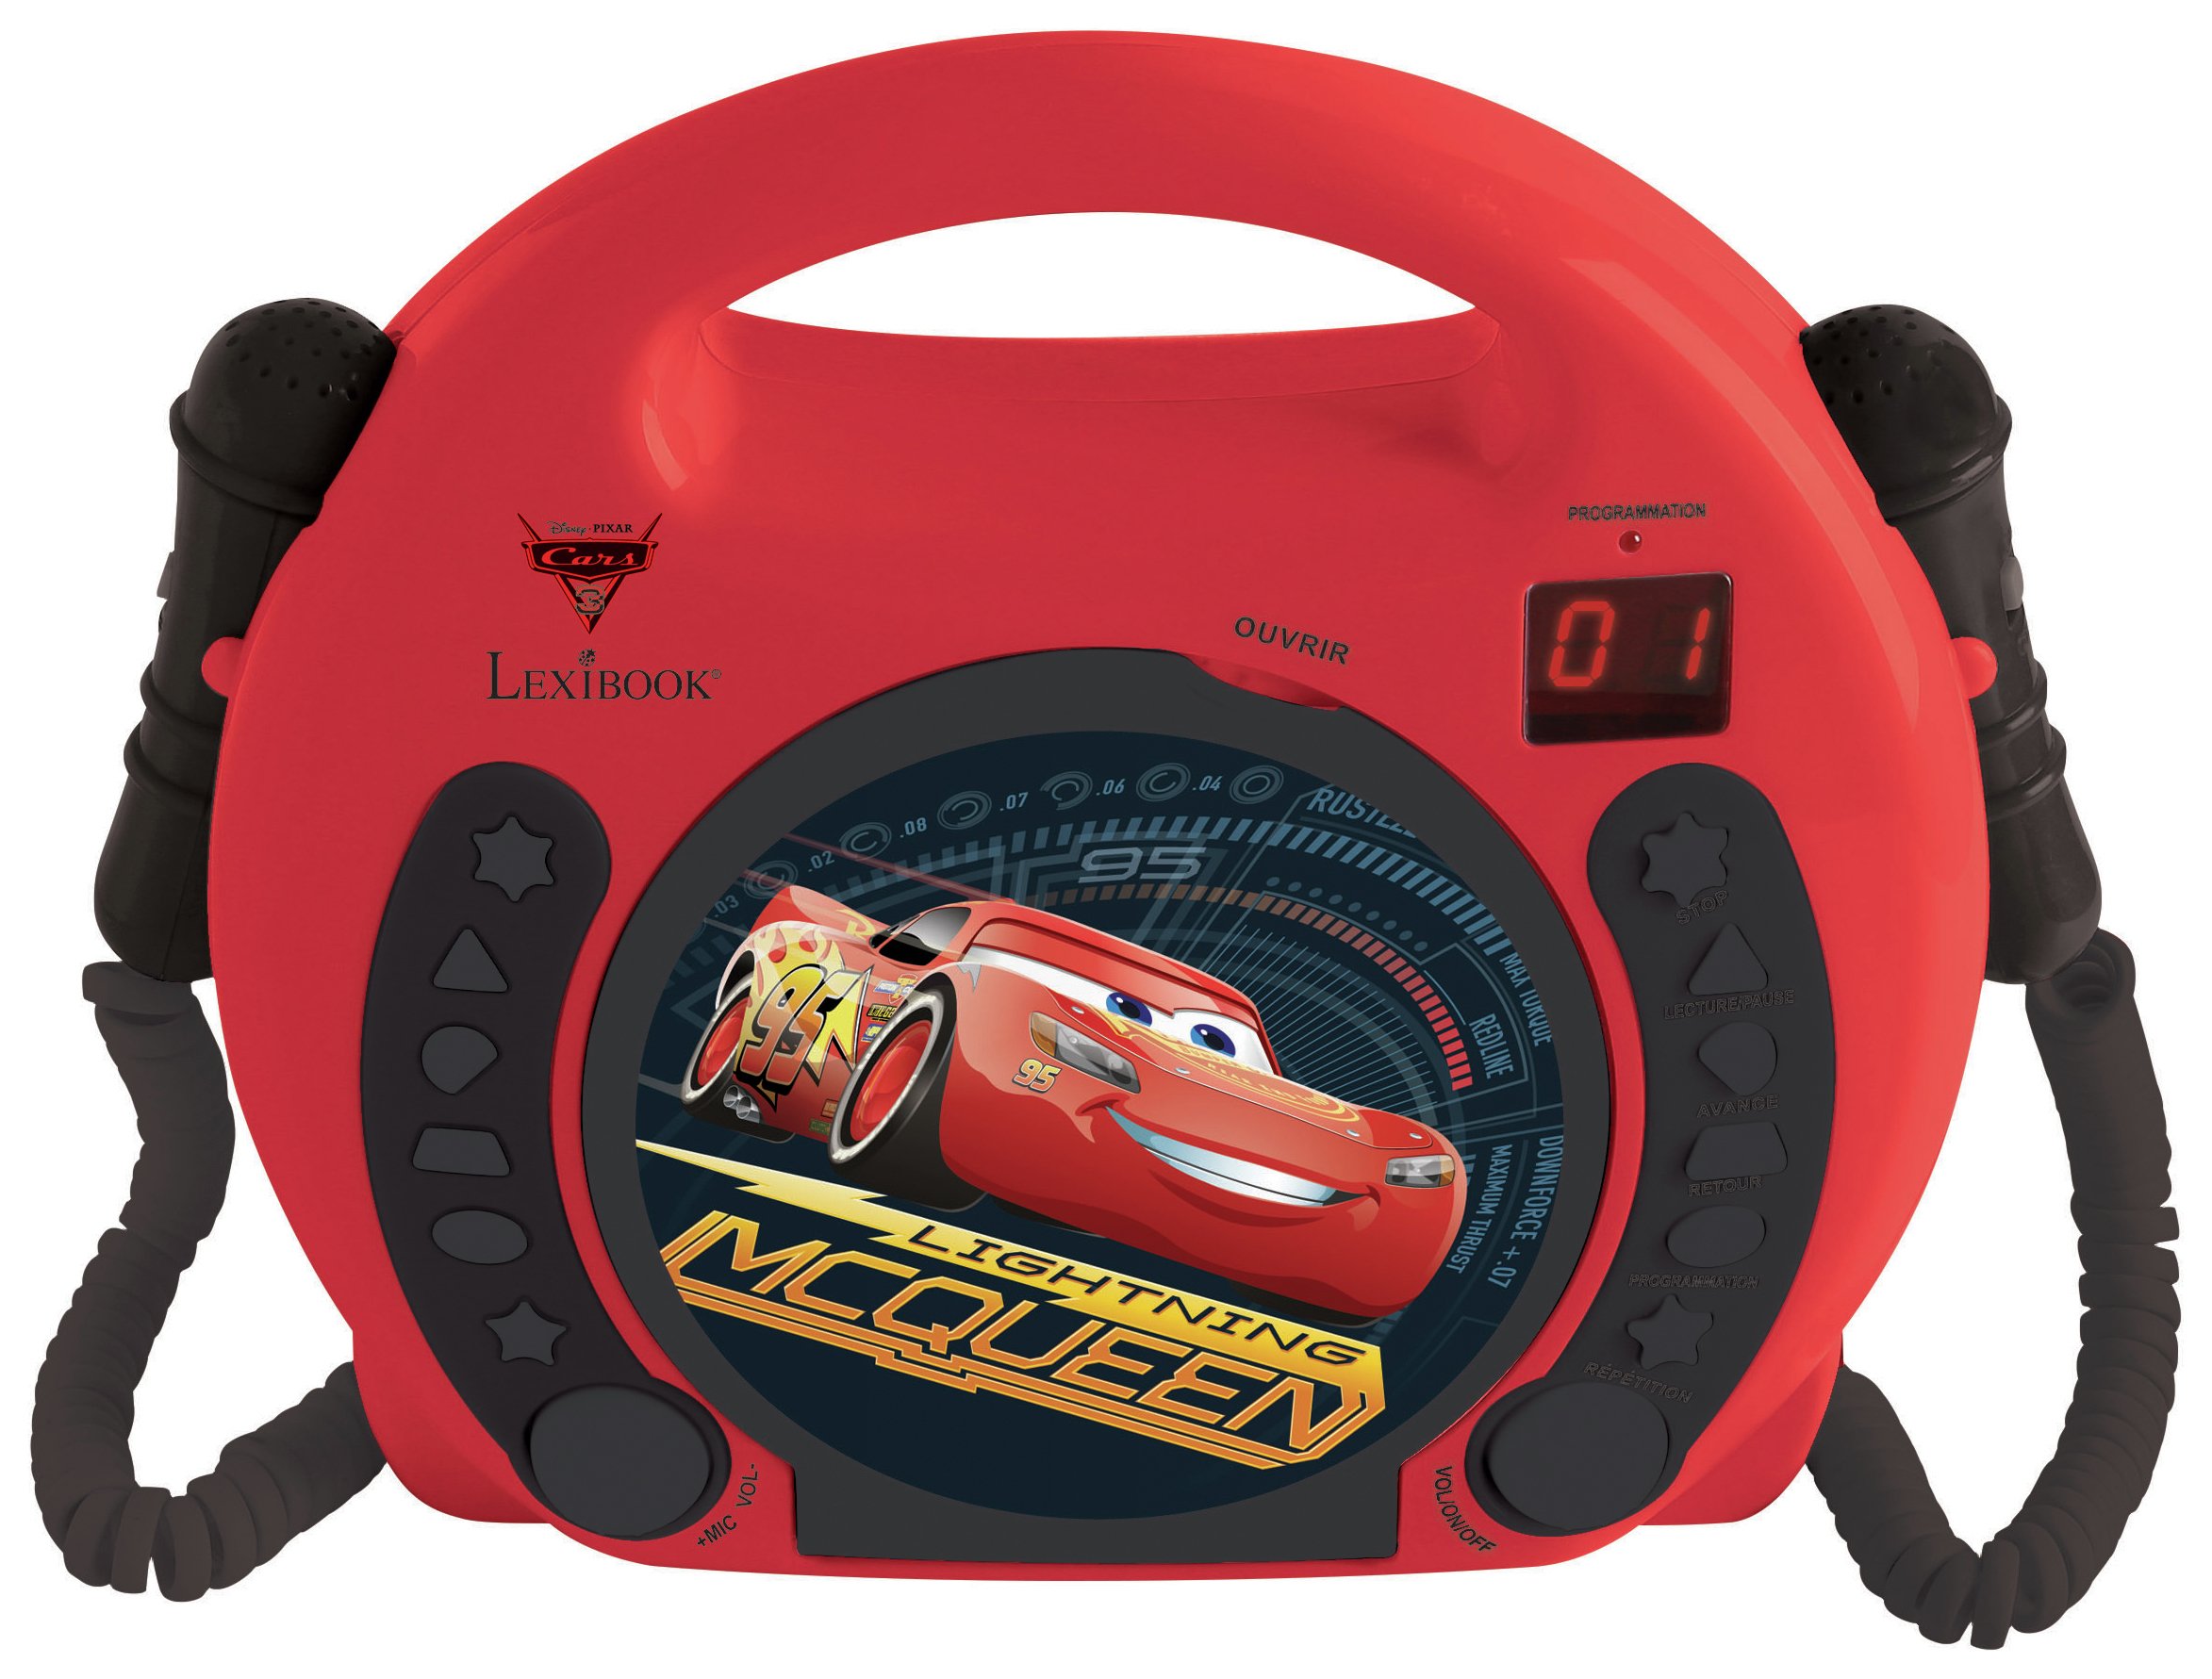 Disney Cars CD Player with 2 Microphones. Reviews